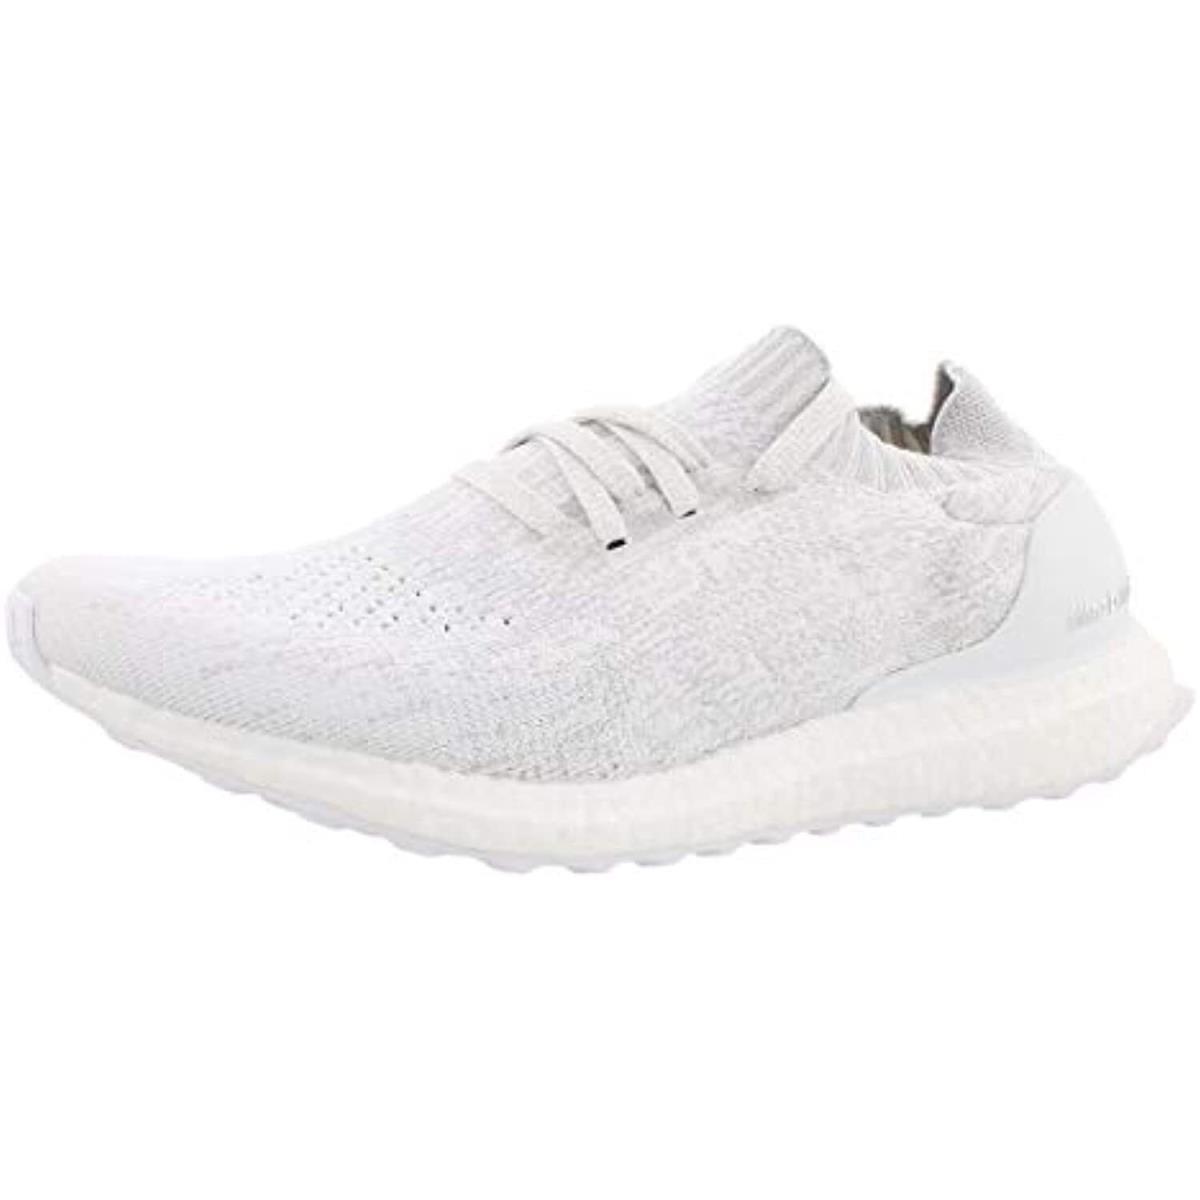 Adidas Ultraboost Uncaged Shoe - Men`s Running White/crystal White BY2549